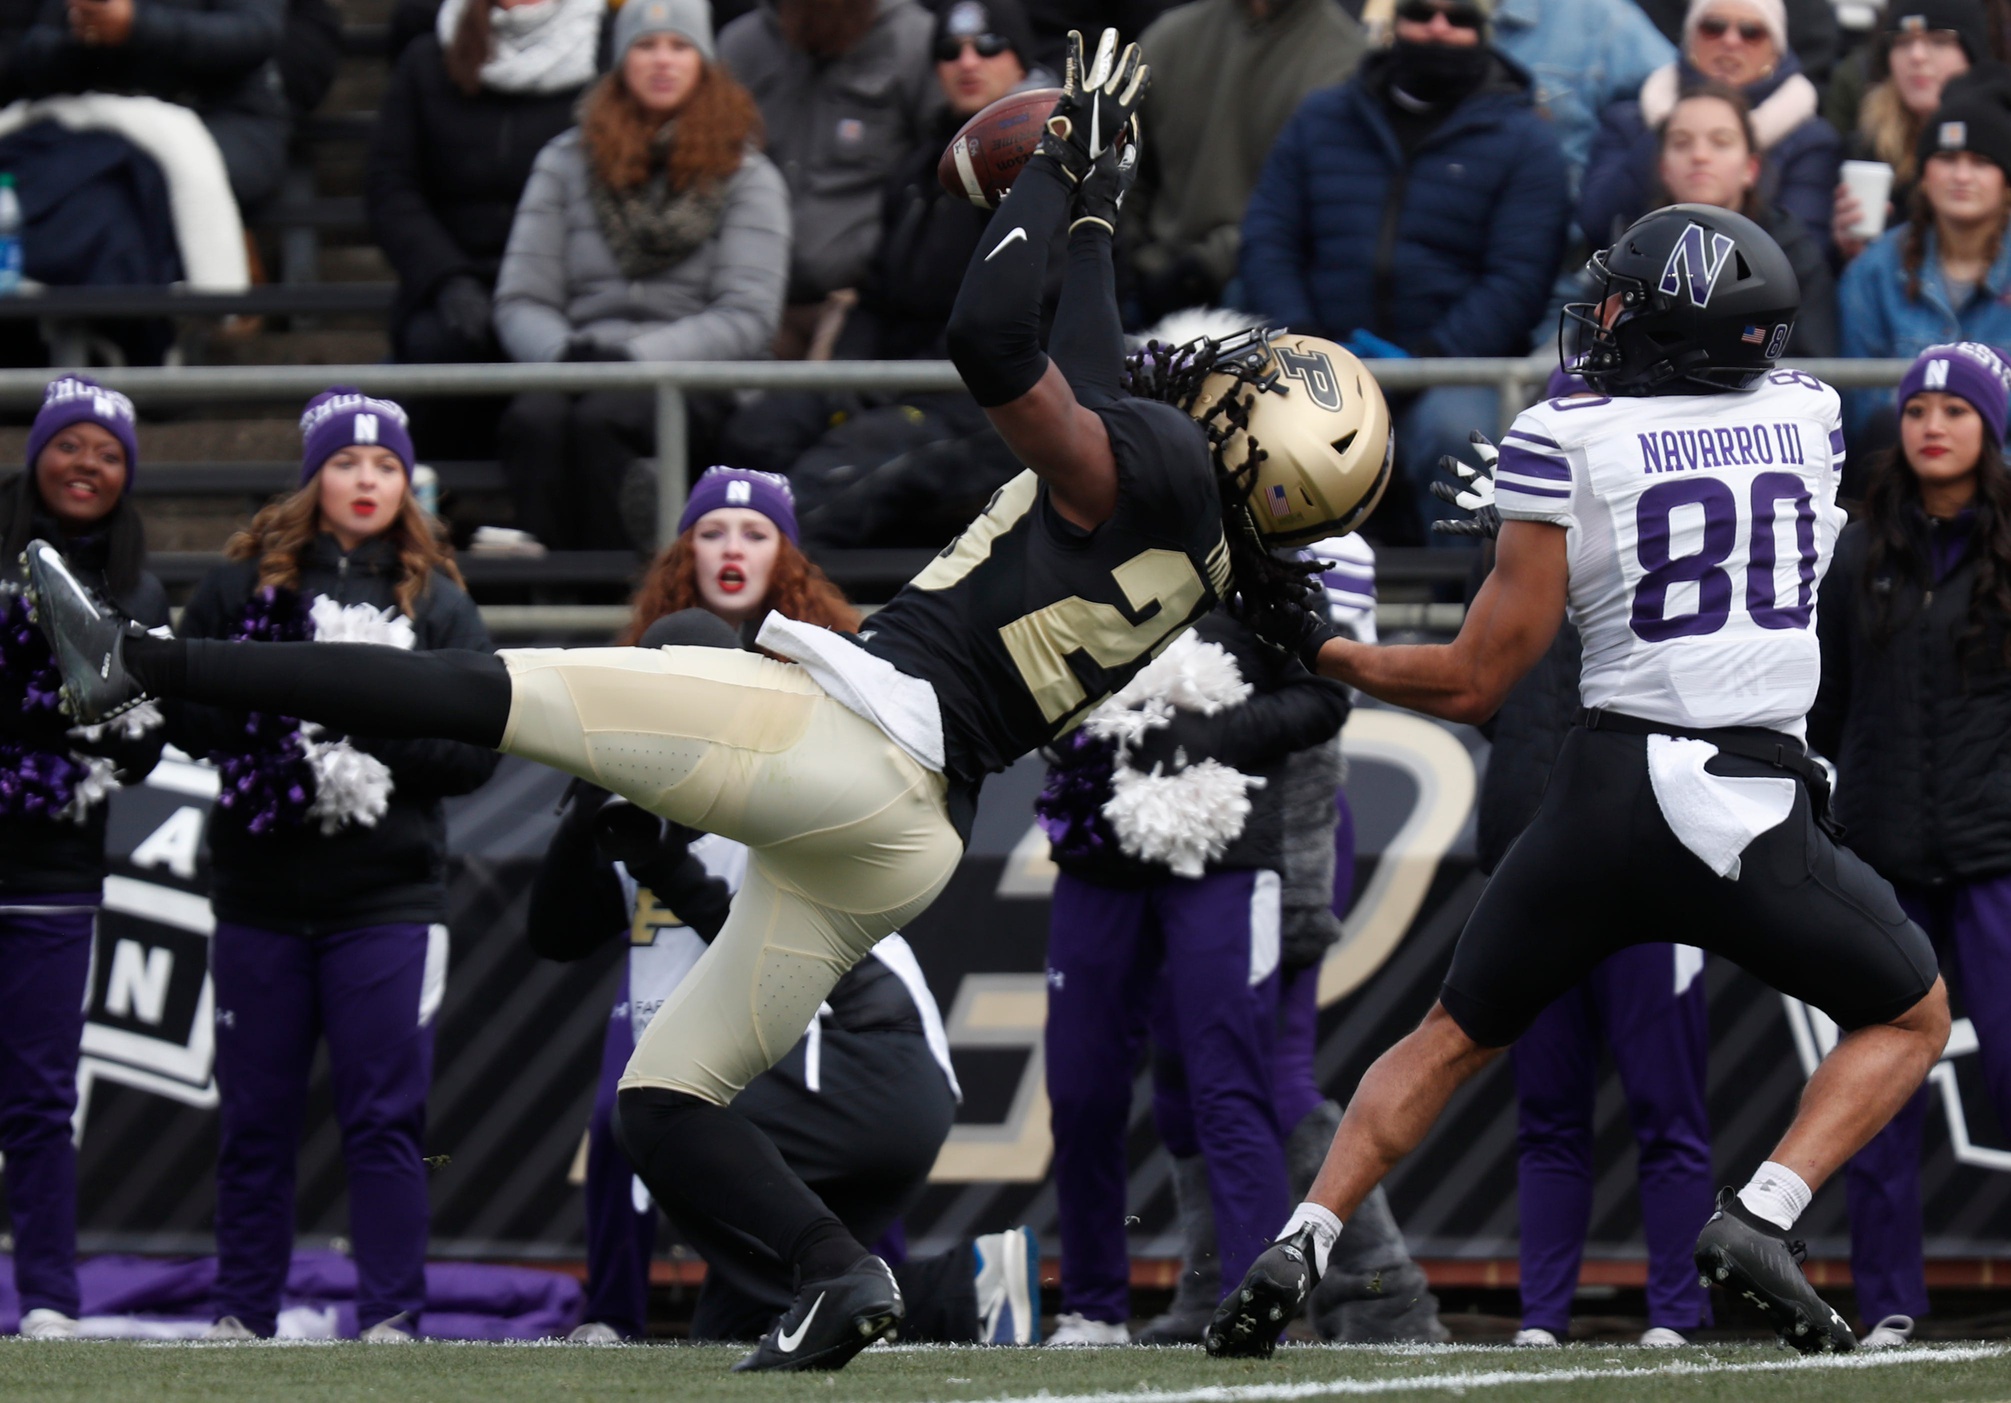 Purdue Boilermakers cornerback Cory Trice (23) deflects the pass intended for Northwestern Wildcats wide receiver Donny Navarro III (80) during the NCAA football game, Saturday, Nov. 19, 2022, at Ross-Ade Stadium in West Lafayette, Ind. Purdue won 17-9. (Alex Martin/Journal and Courier/USA Today Network)